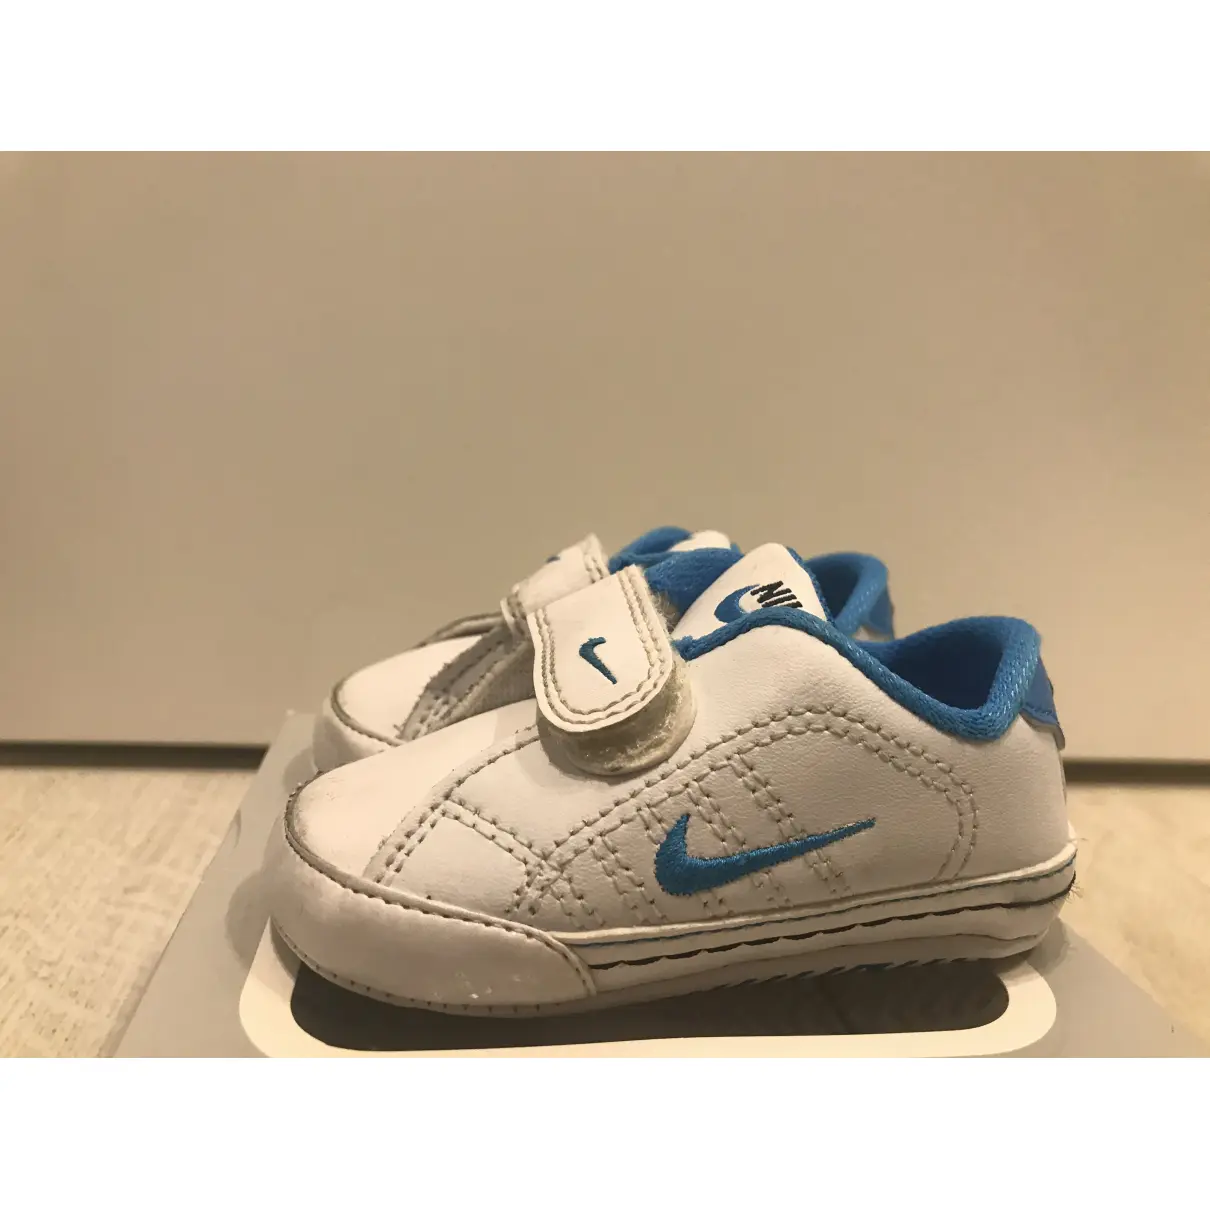 Buy Nike Leather first shoes online